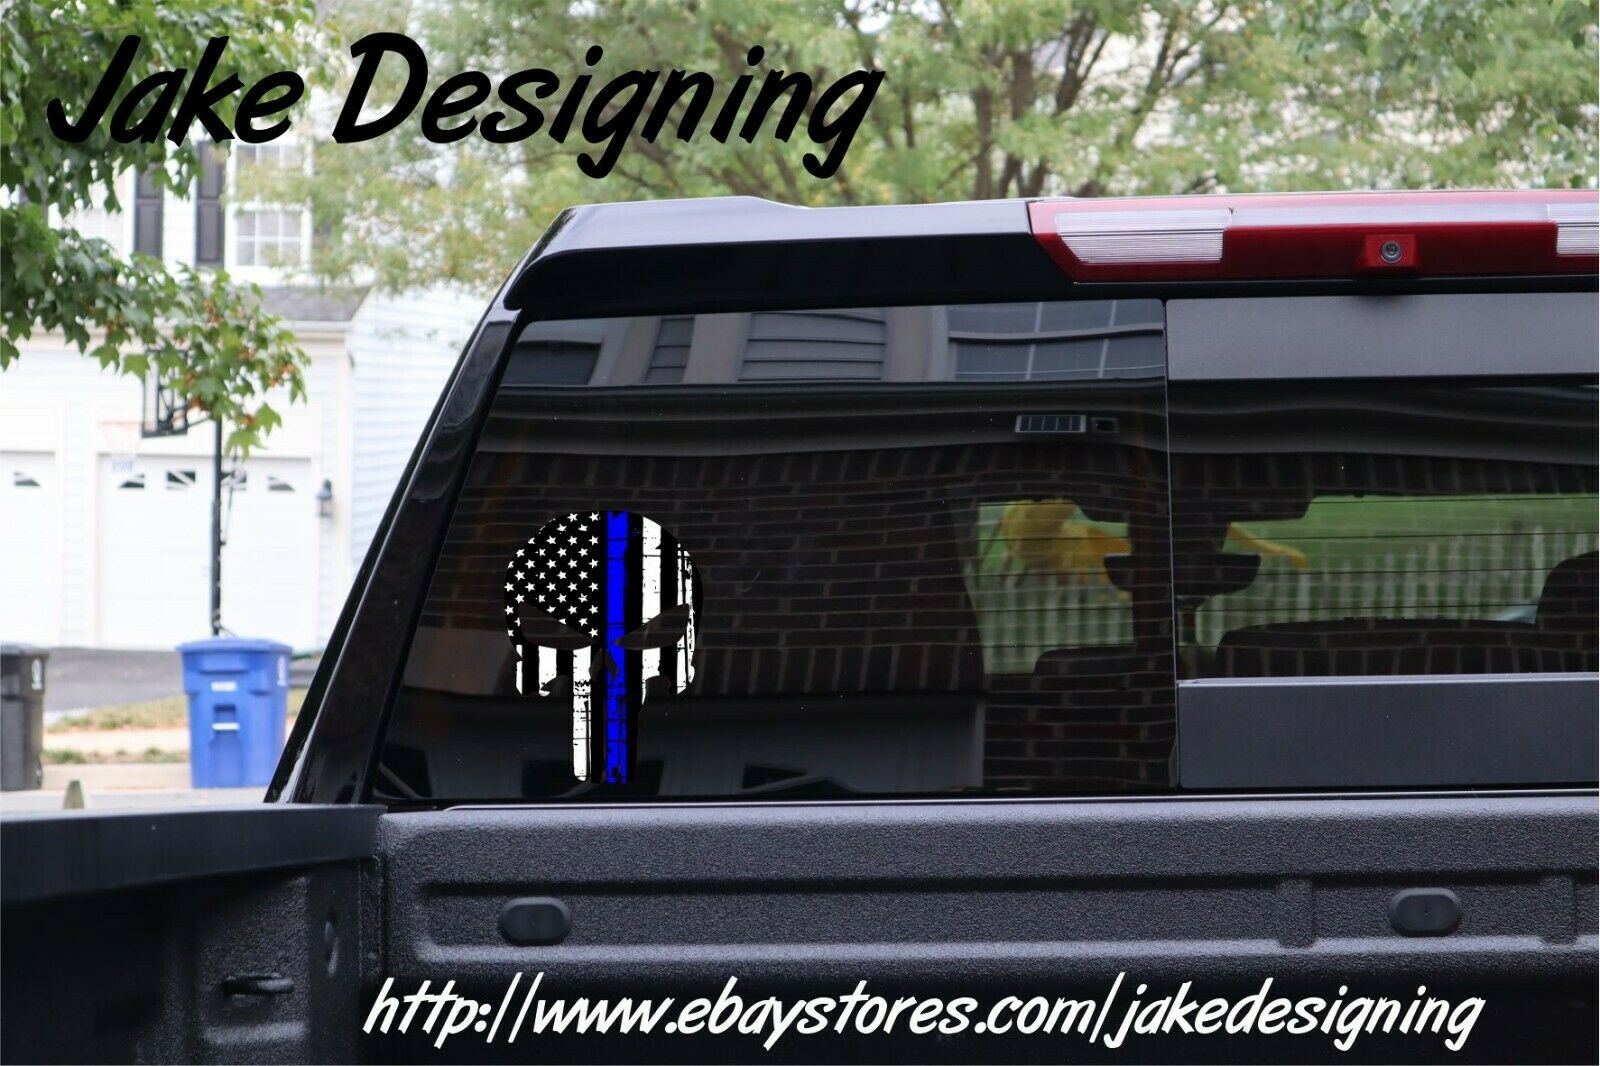 Punisher Skull American Flag Police Blue Line Decal - Graphic Various Sizes - Powercall Sirens LLC